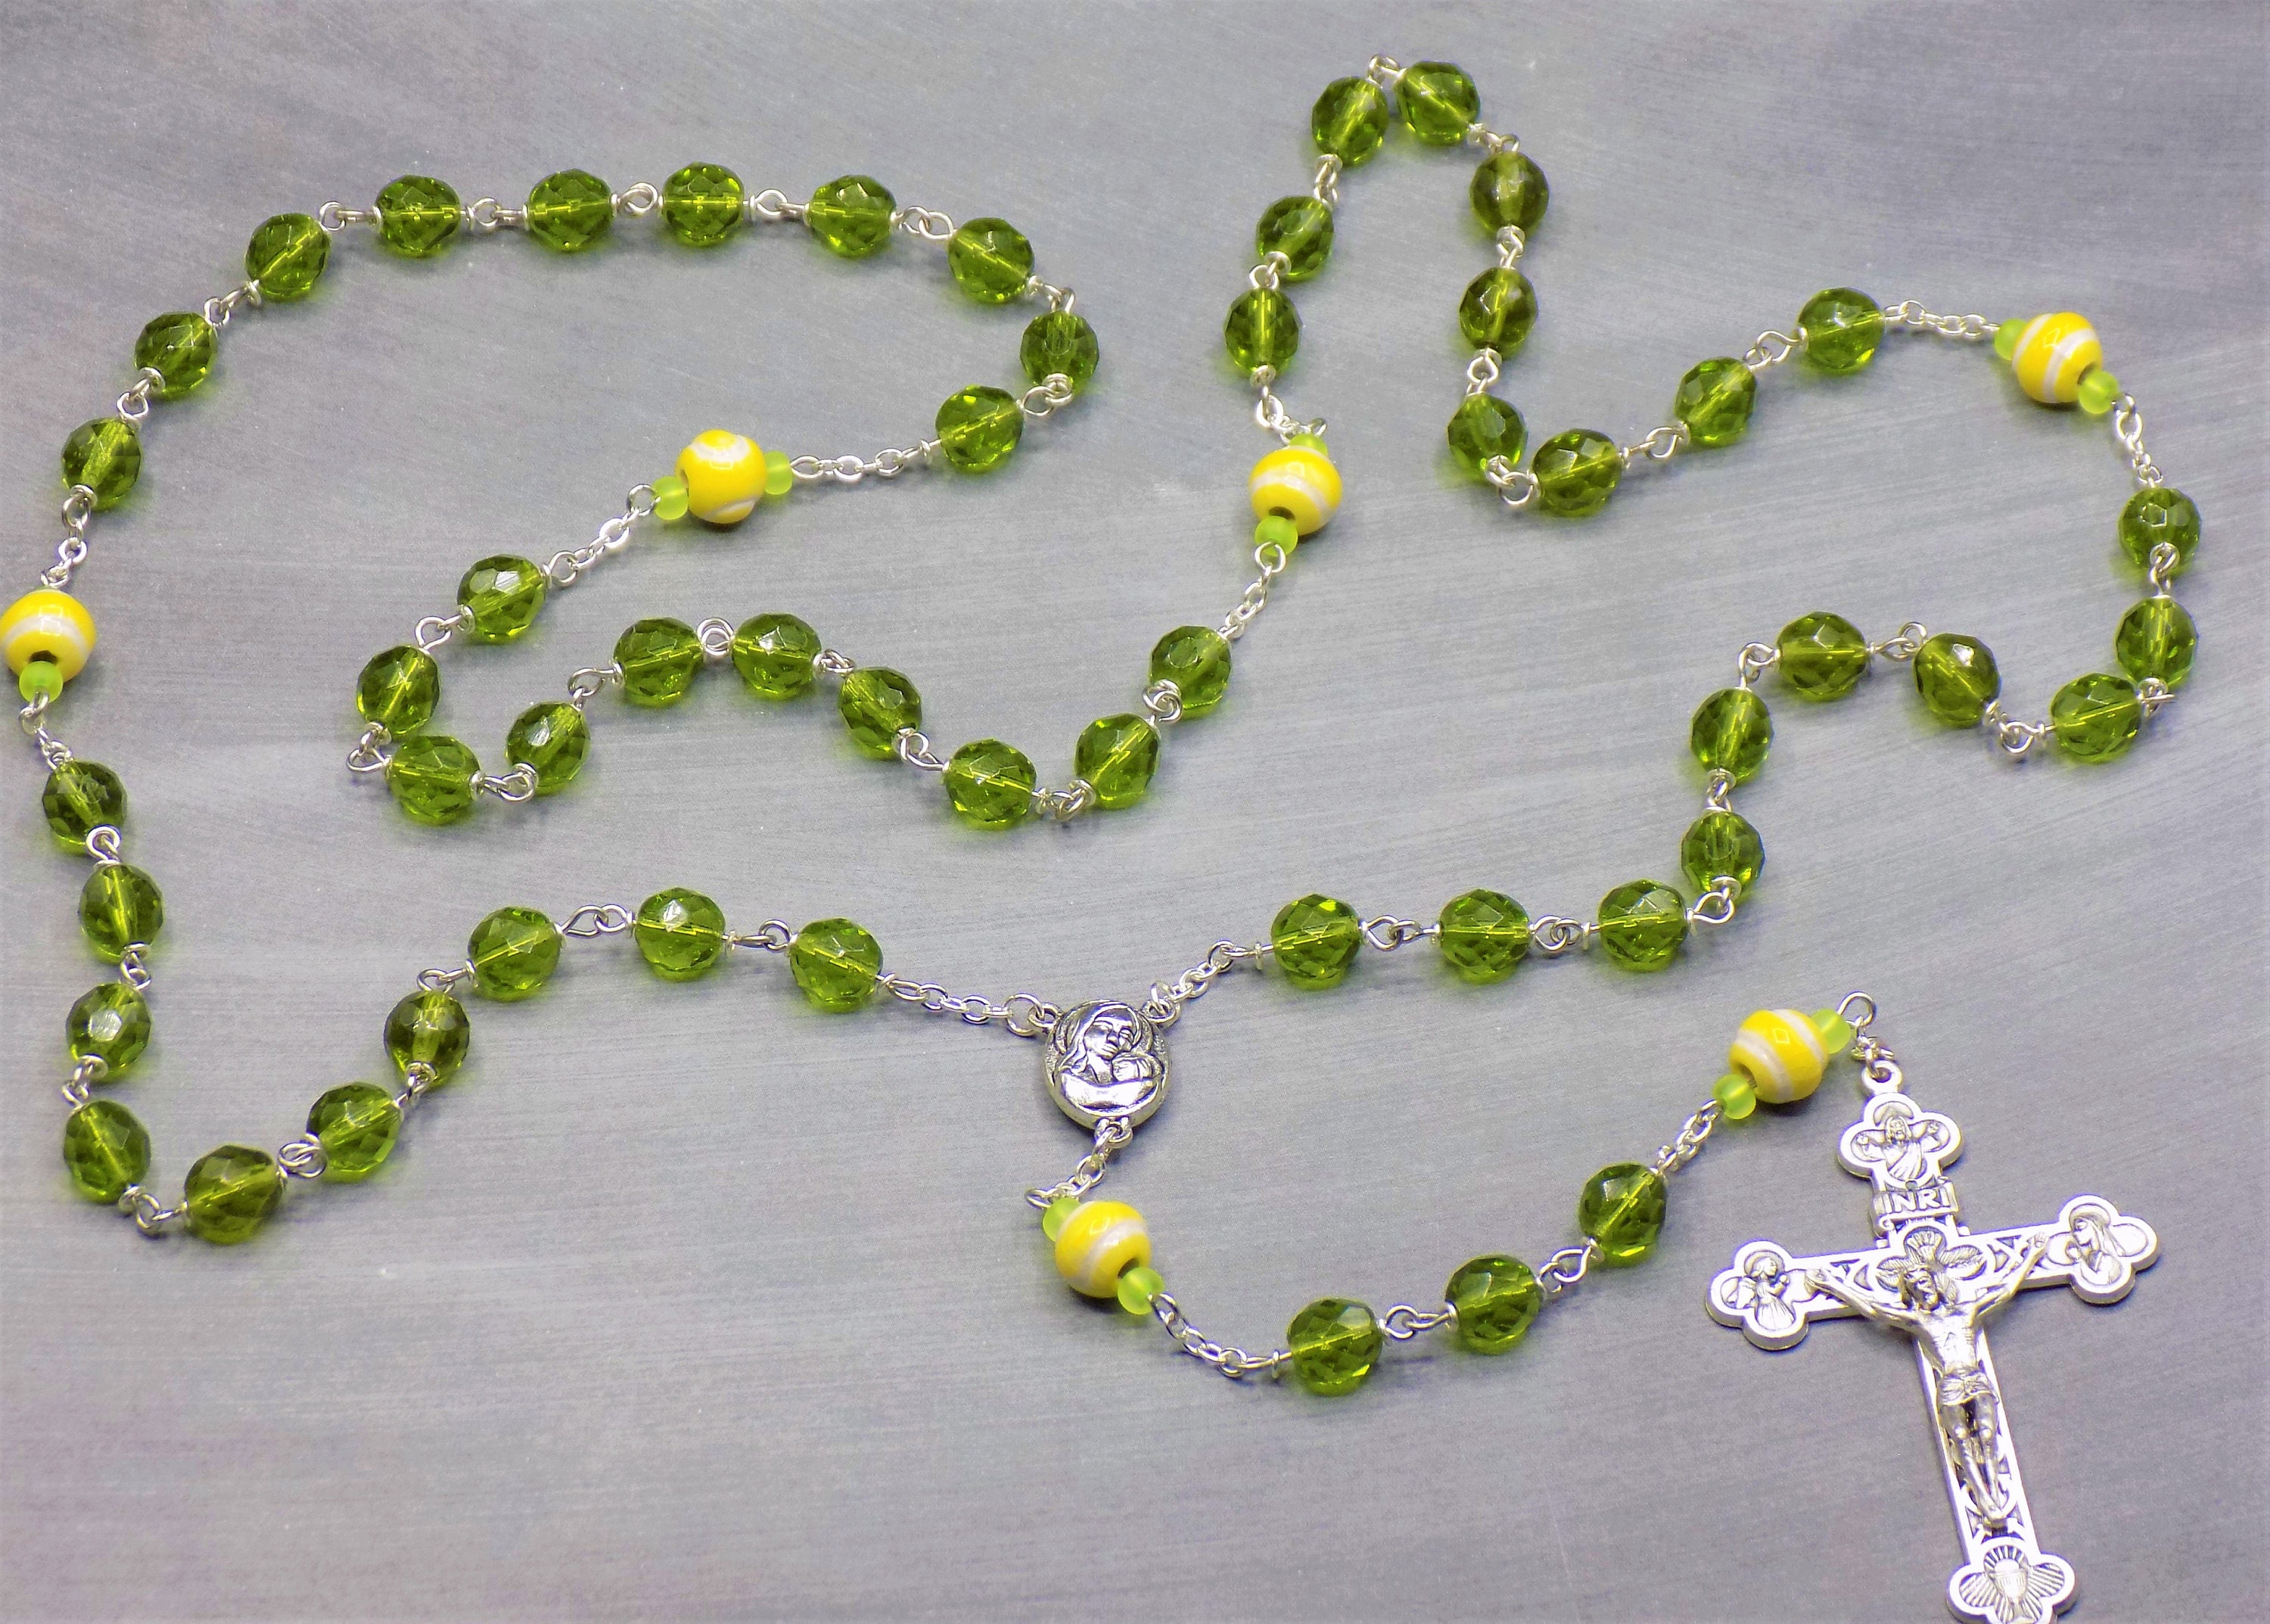 Rosary Rosary Beads Glass rosary Rosary with glass beads Green Rosary Bead 